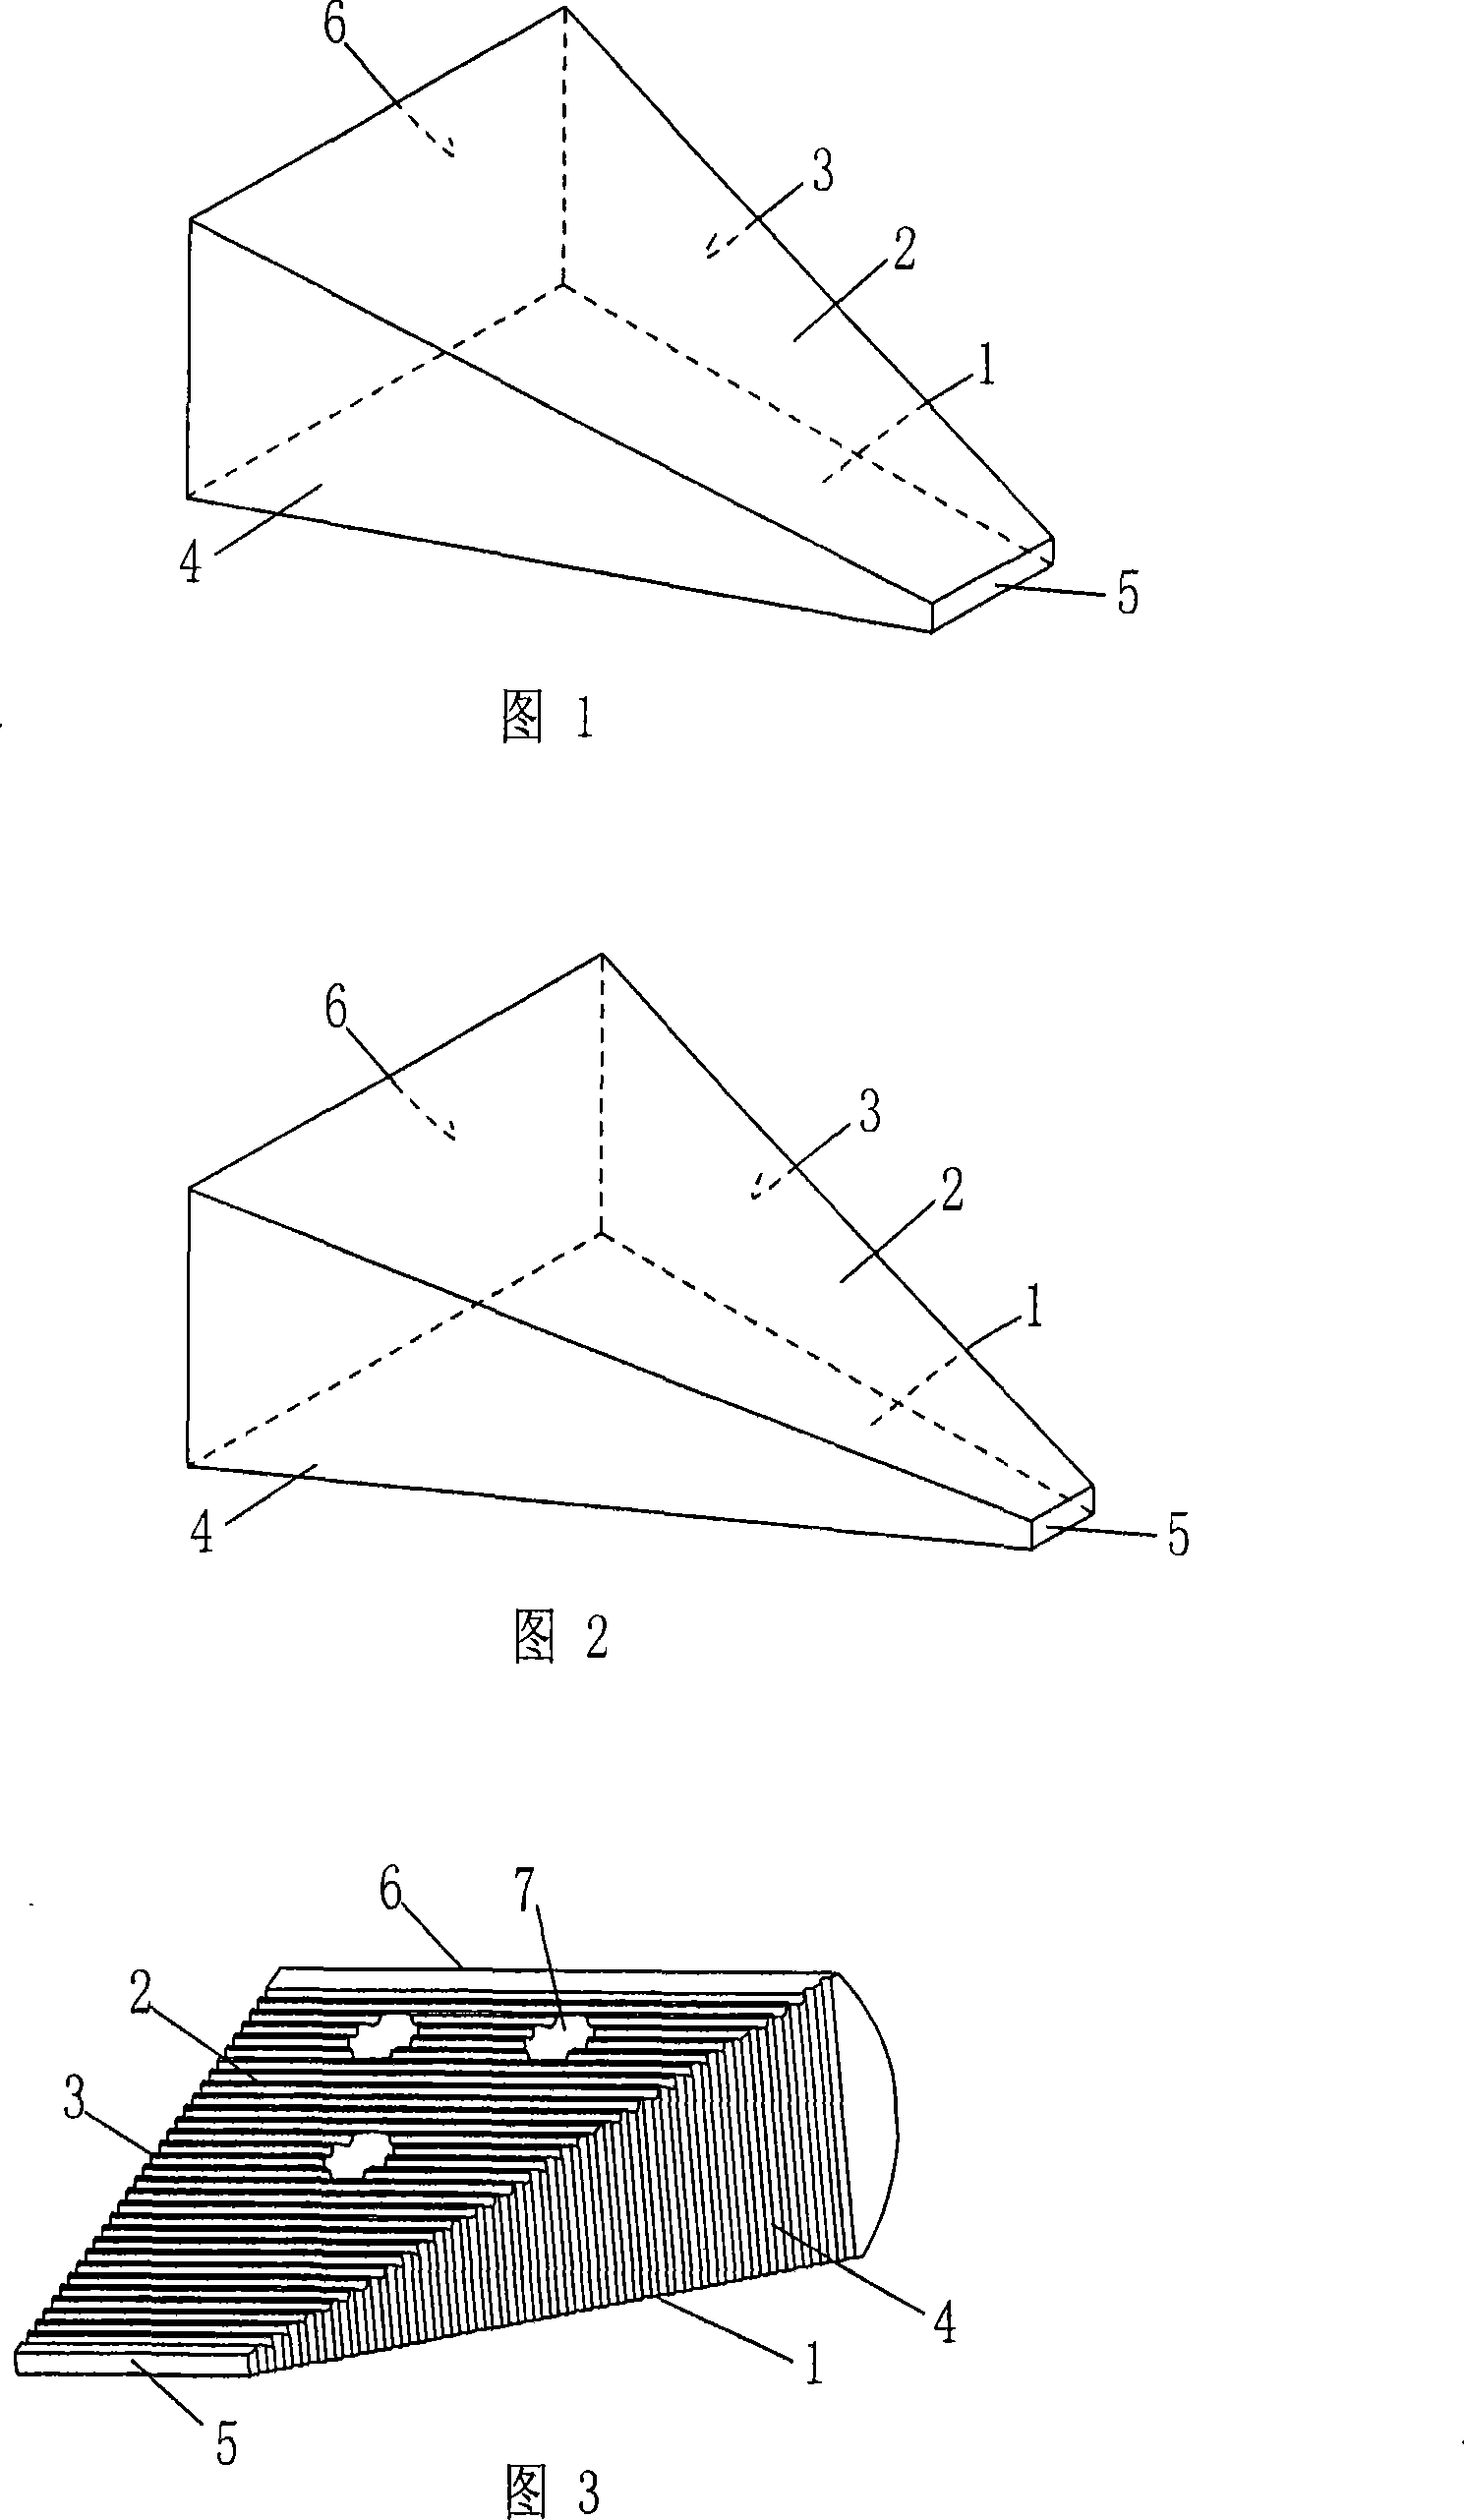 Integral limiting device for door with double-wedge shaped structure